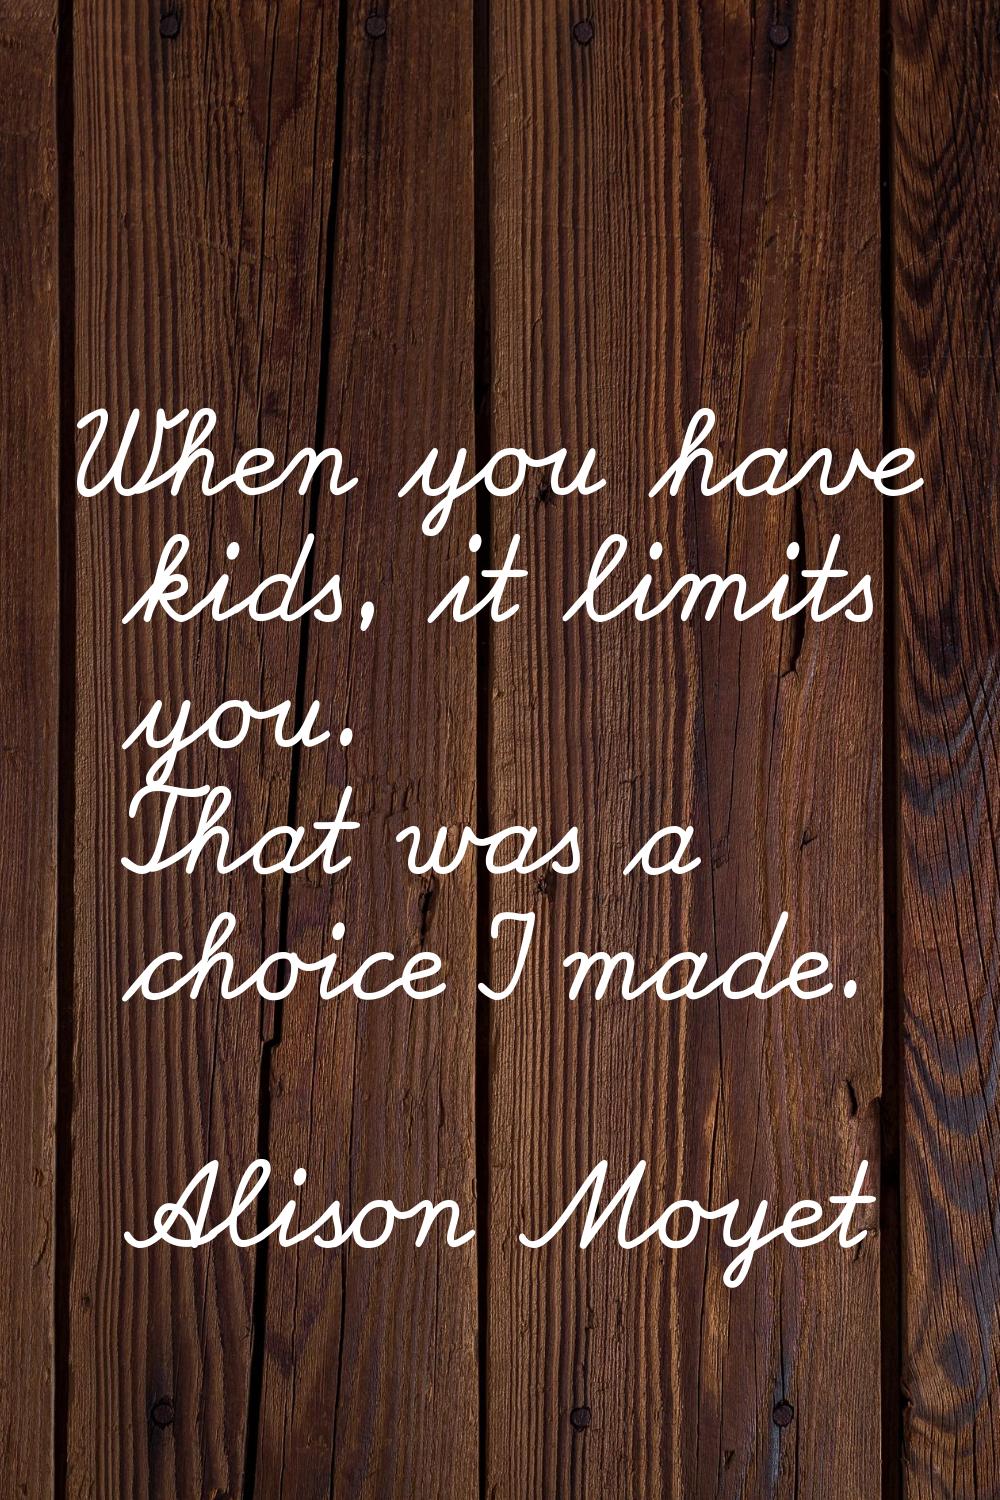 When you have kids, it limits you. That was a choice I made.